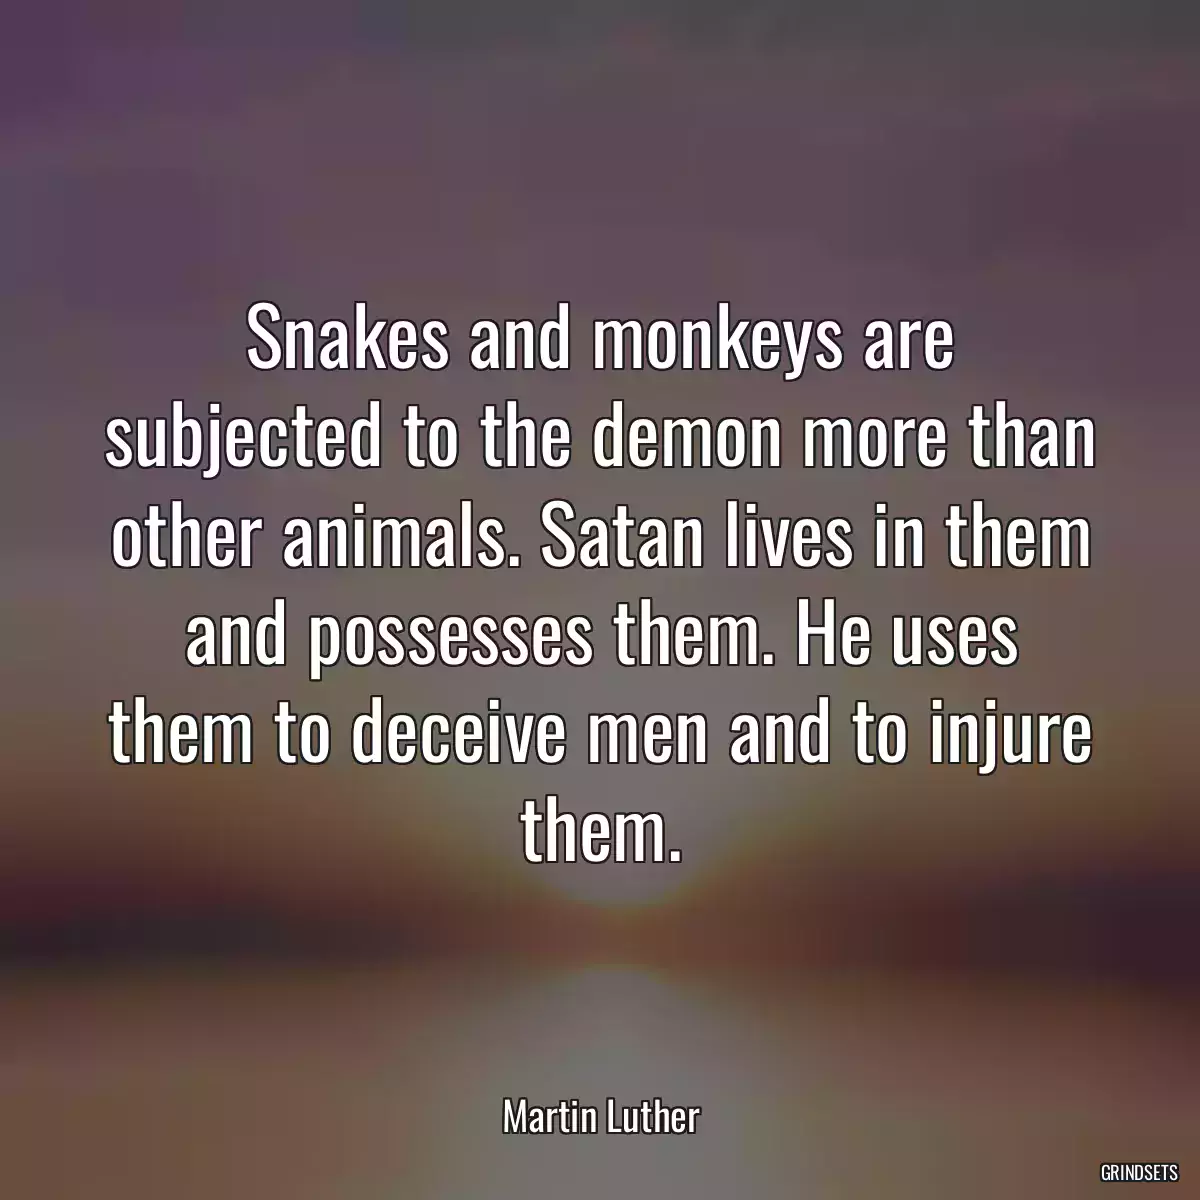 Snakes and monkeys are subjected to the demon more than other animals. Satan lives in them and possesses them. He uses them to deceive men and to injure them.